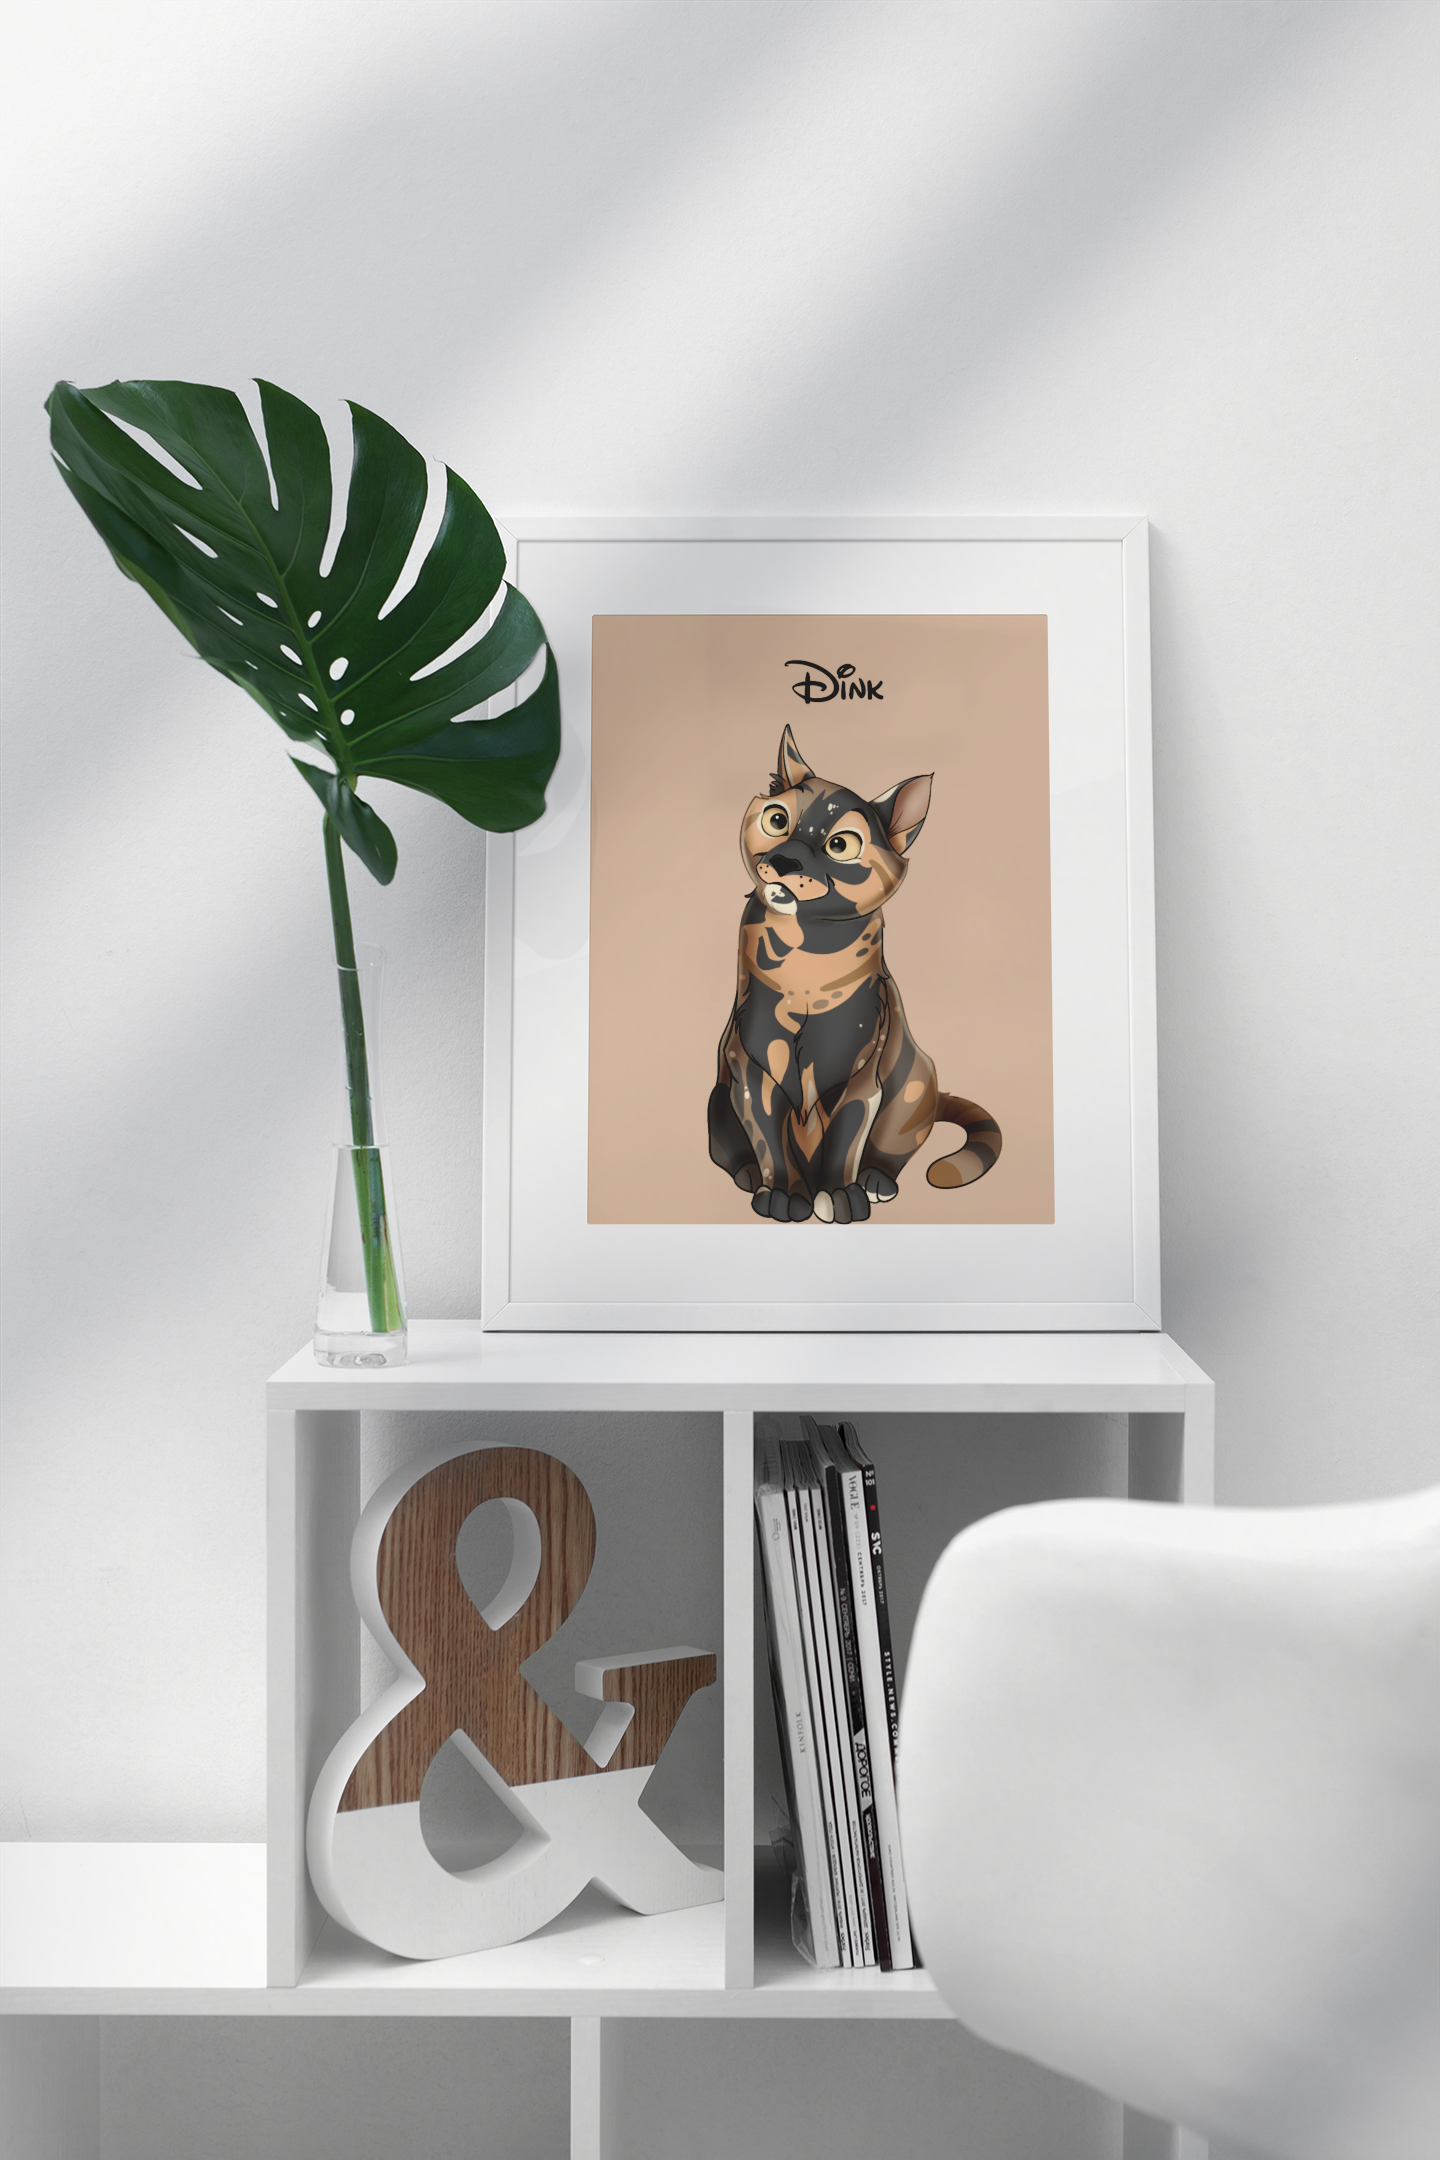 Pet Painting, Pet Portrait, Custom Pet Portrait, Custom Dog Portrait, Custom Watercolor Portrait, Dog Art, Dog Watercolor, Dog Painting Pet Portrait Custom and Personalized. Pet Dog Wall Art DIGITAL DOWNLOAD to Print on Poster or Canvas for gift.